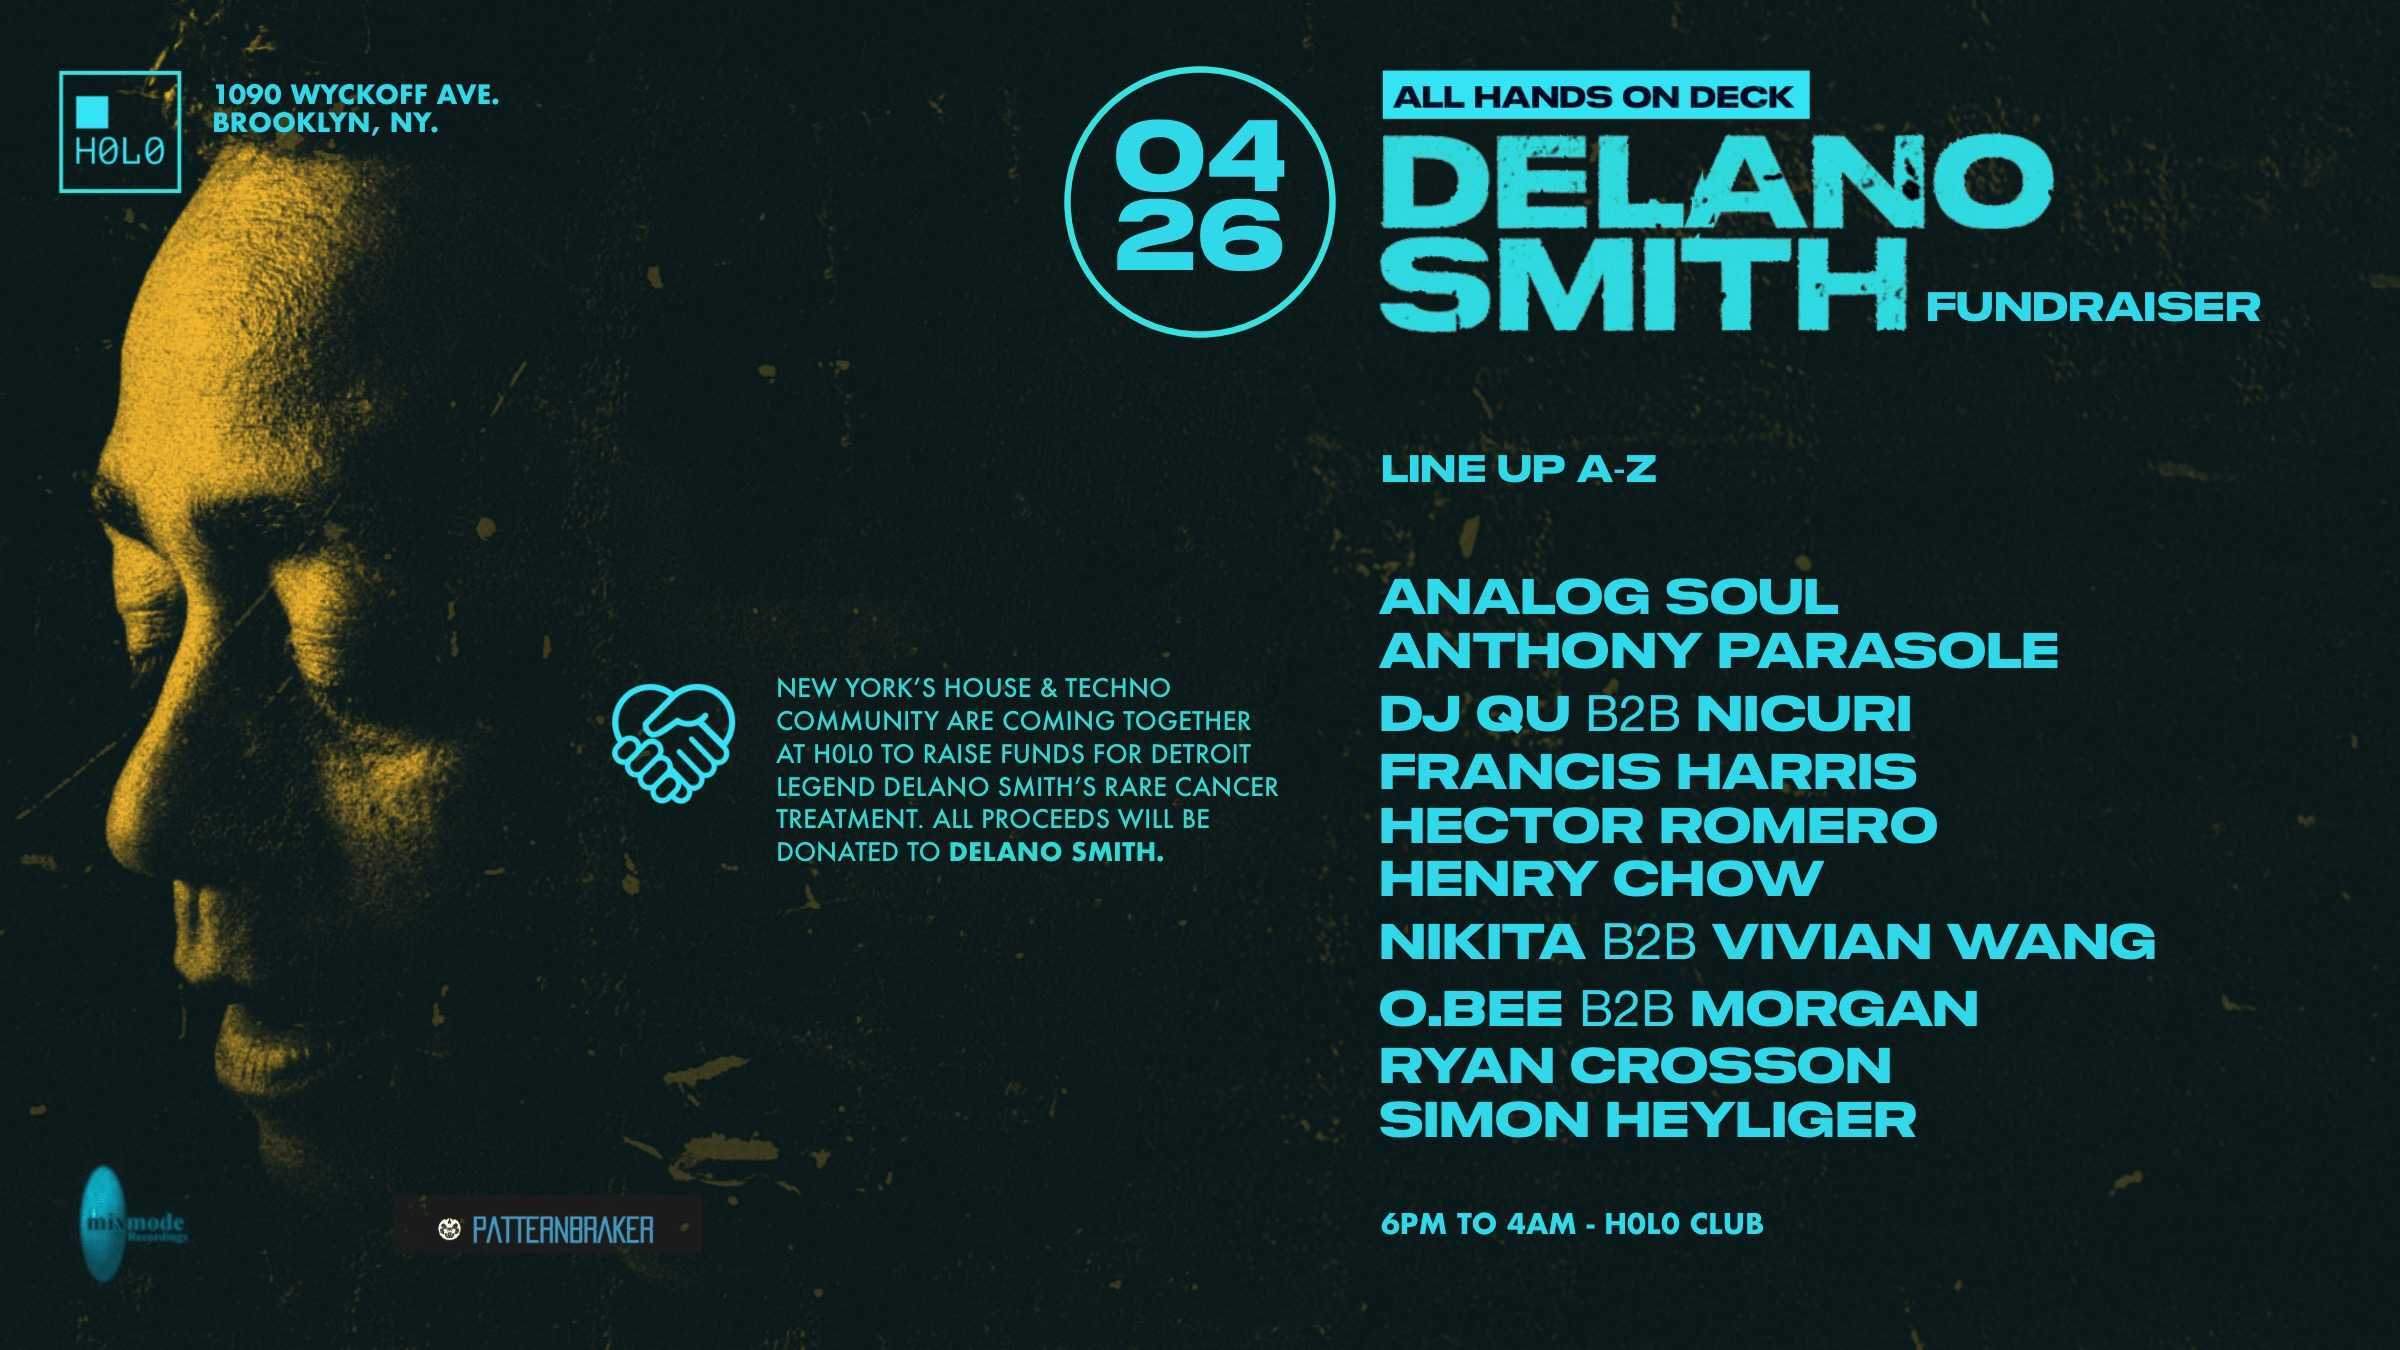 All Hands on Deck: Fundraiser for Delano Smith - フライヤー表